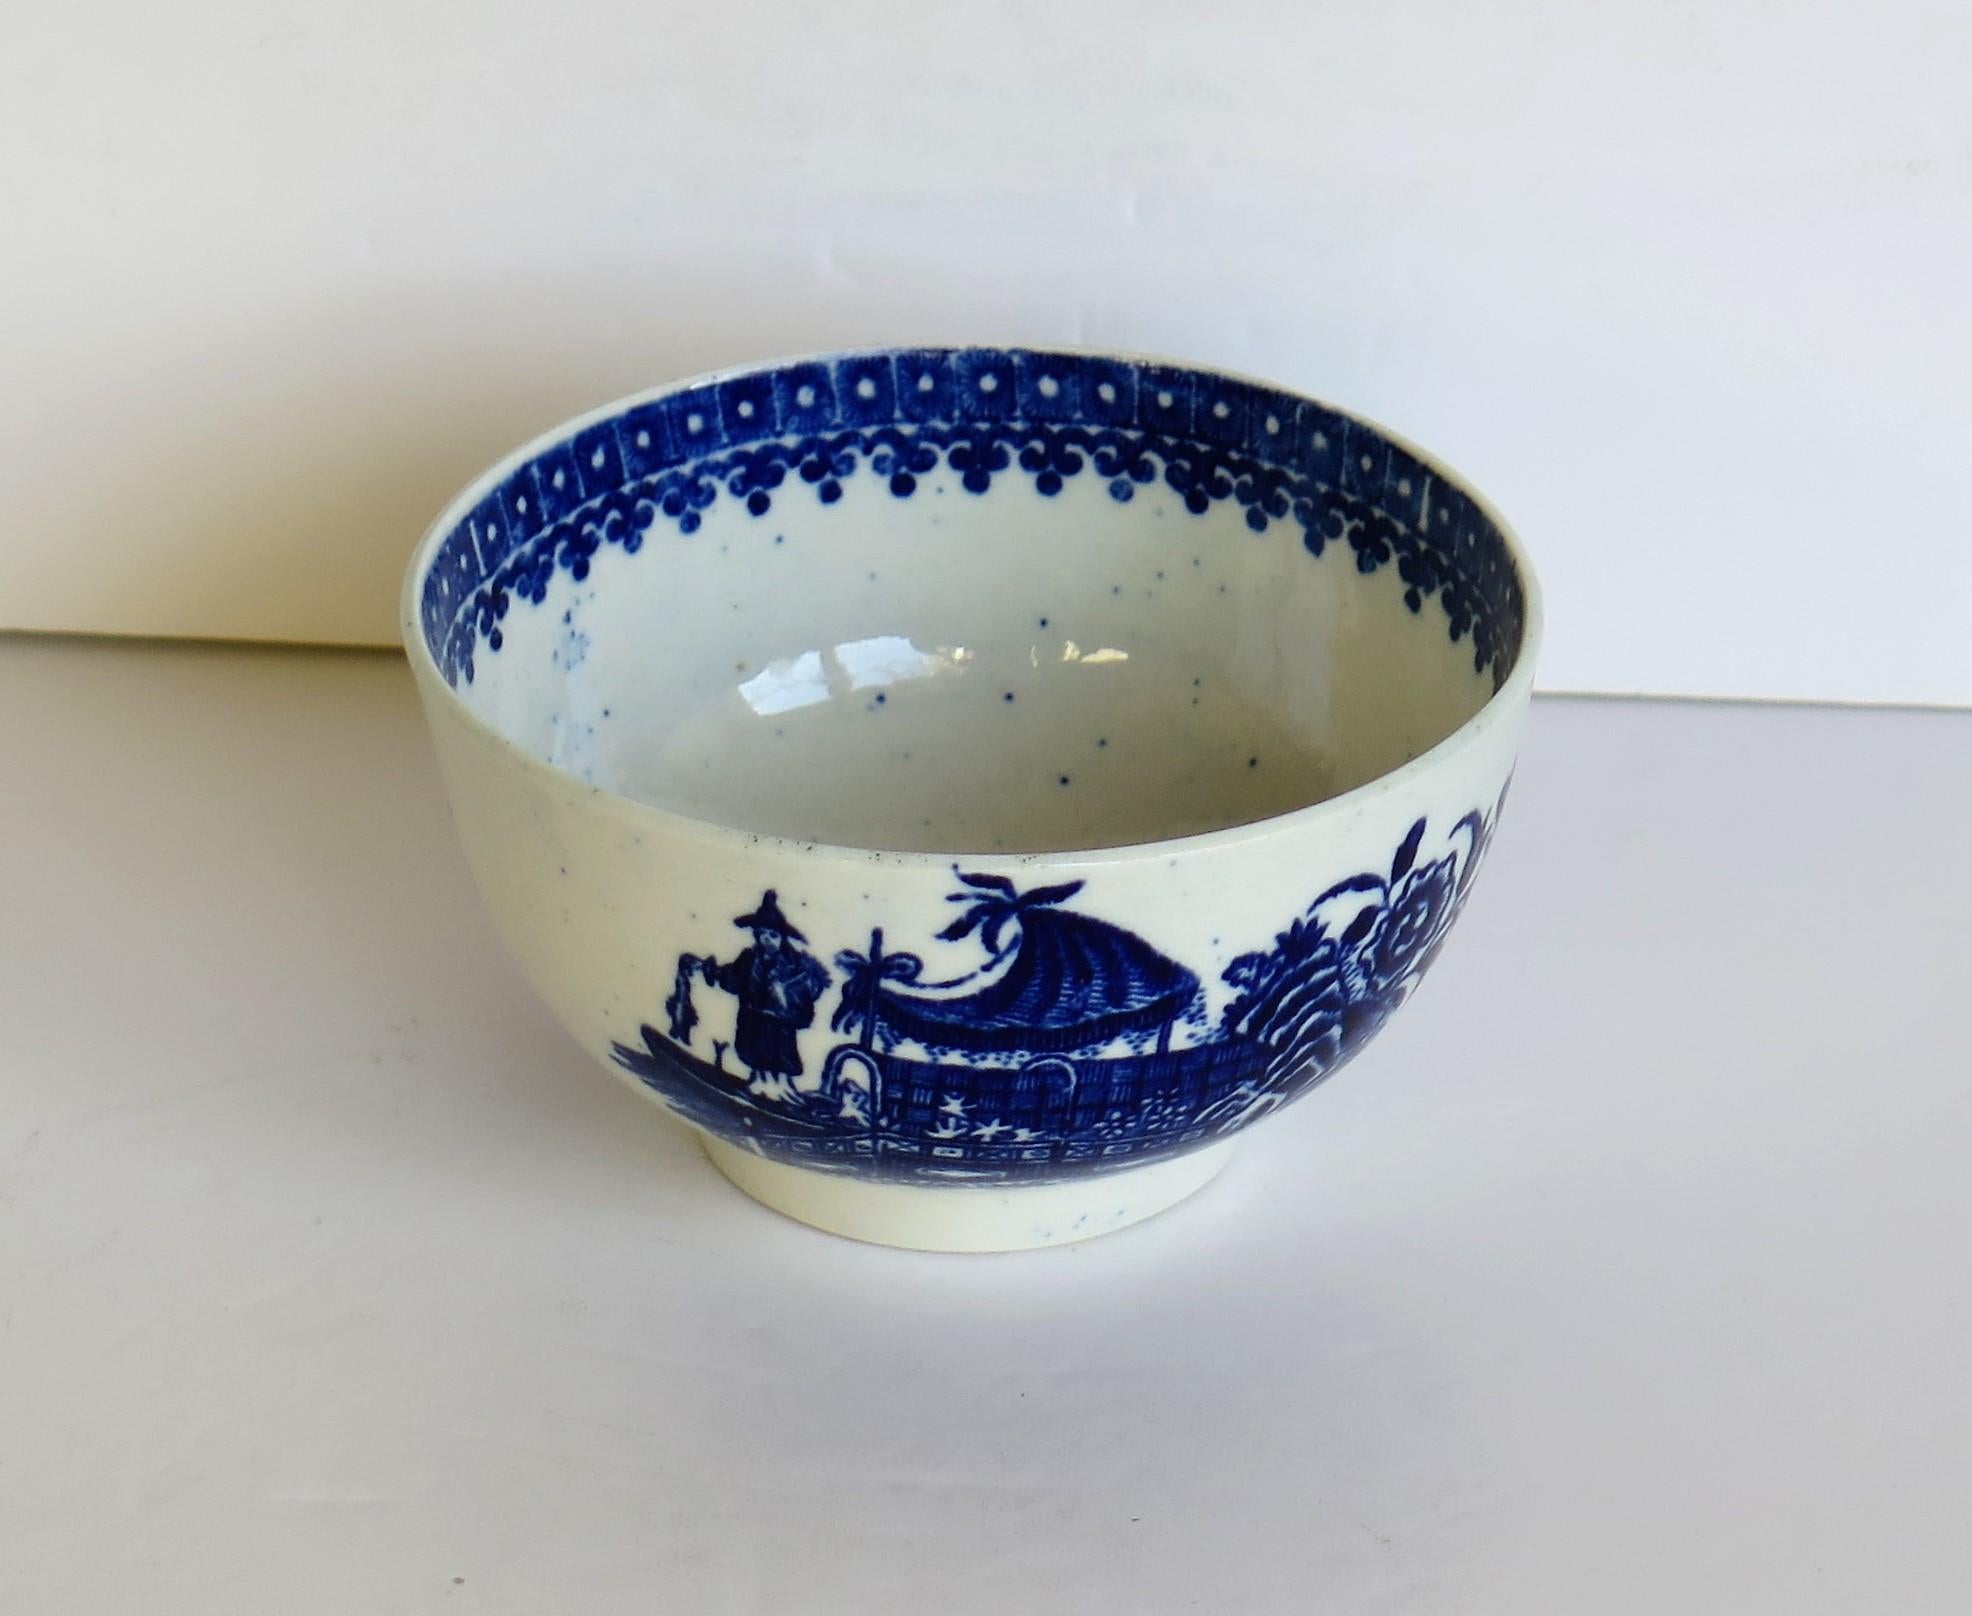 A good 18th century, First period ( Dr. Wall), Worcester porcelain bowl, printed in cobalt blue with the 